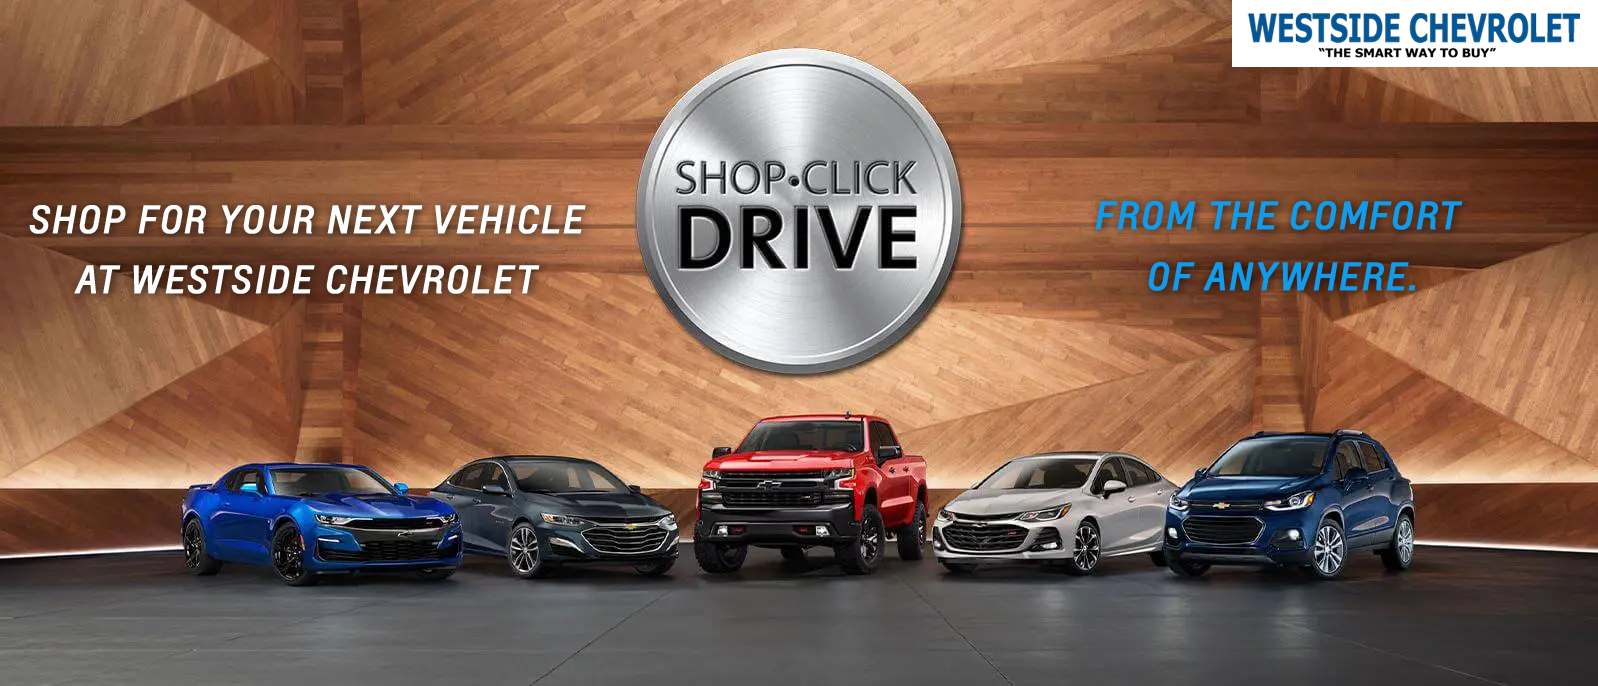 Shop Click Drive for your new vehicle at Westside Chevrolet